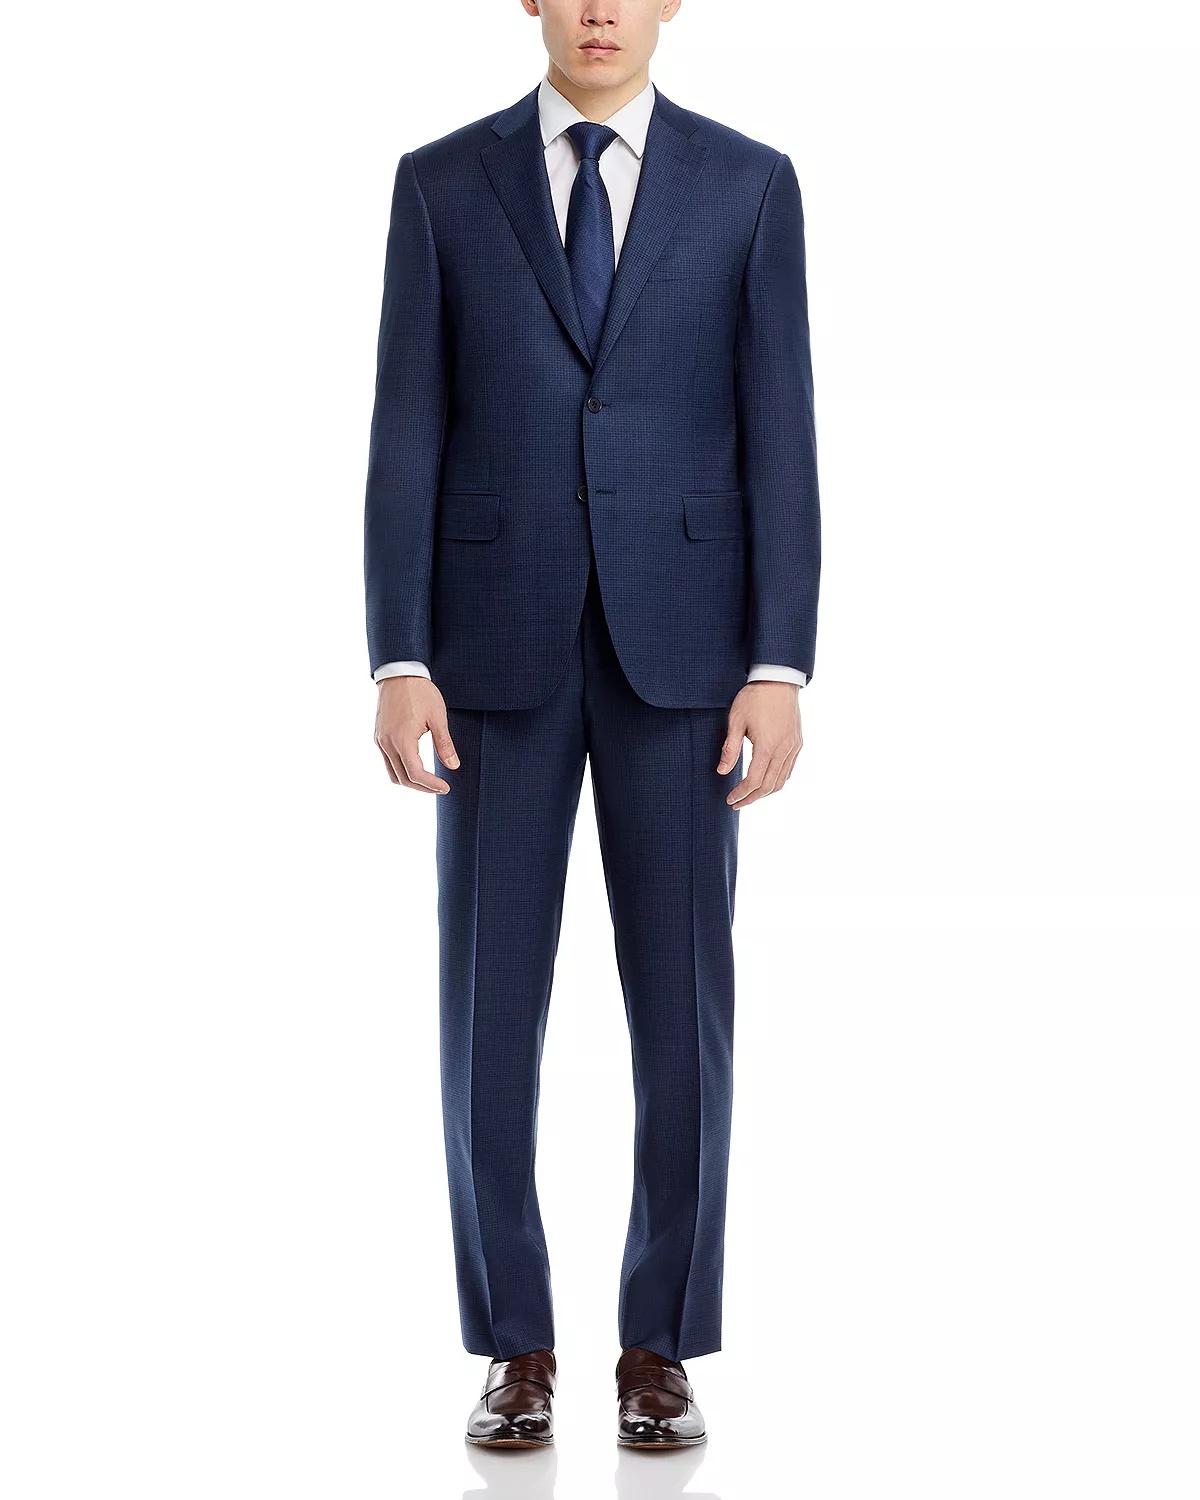 Siena Sharkskin Micro Check Classic Fit Suit - 3